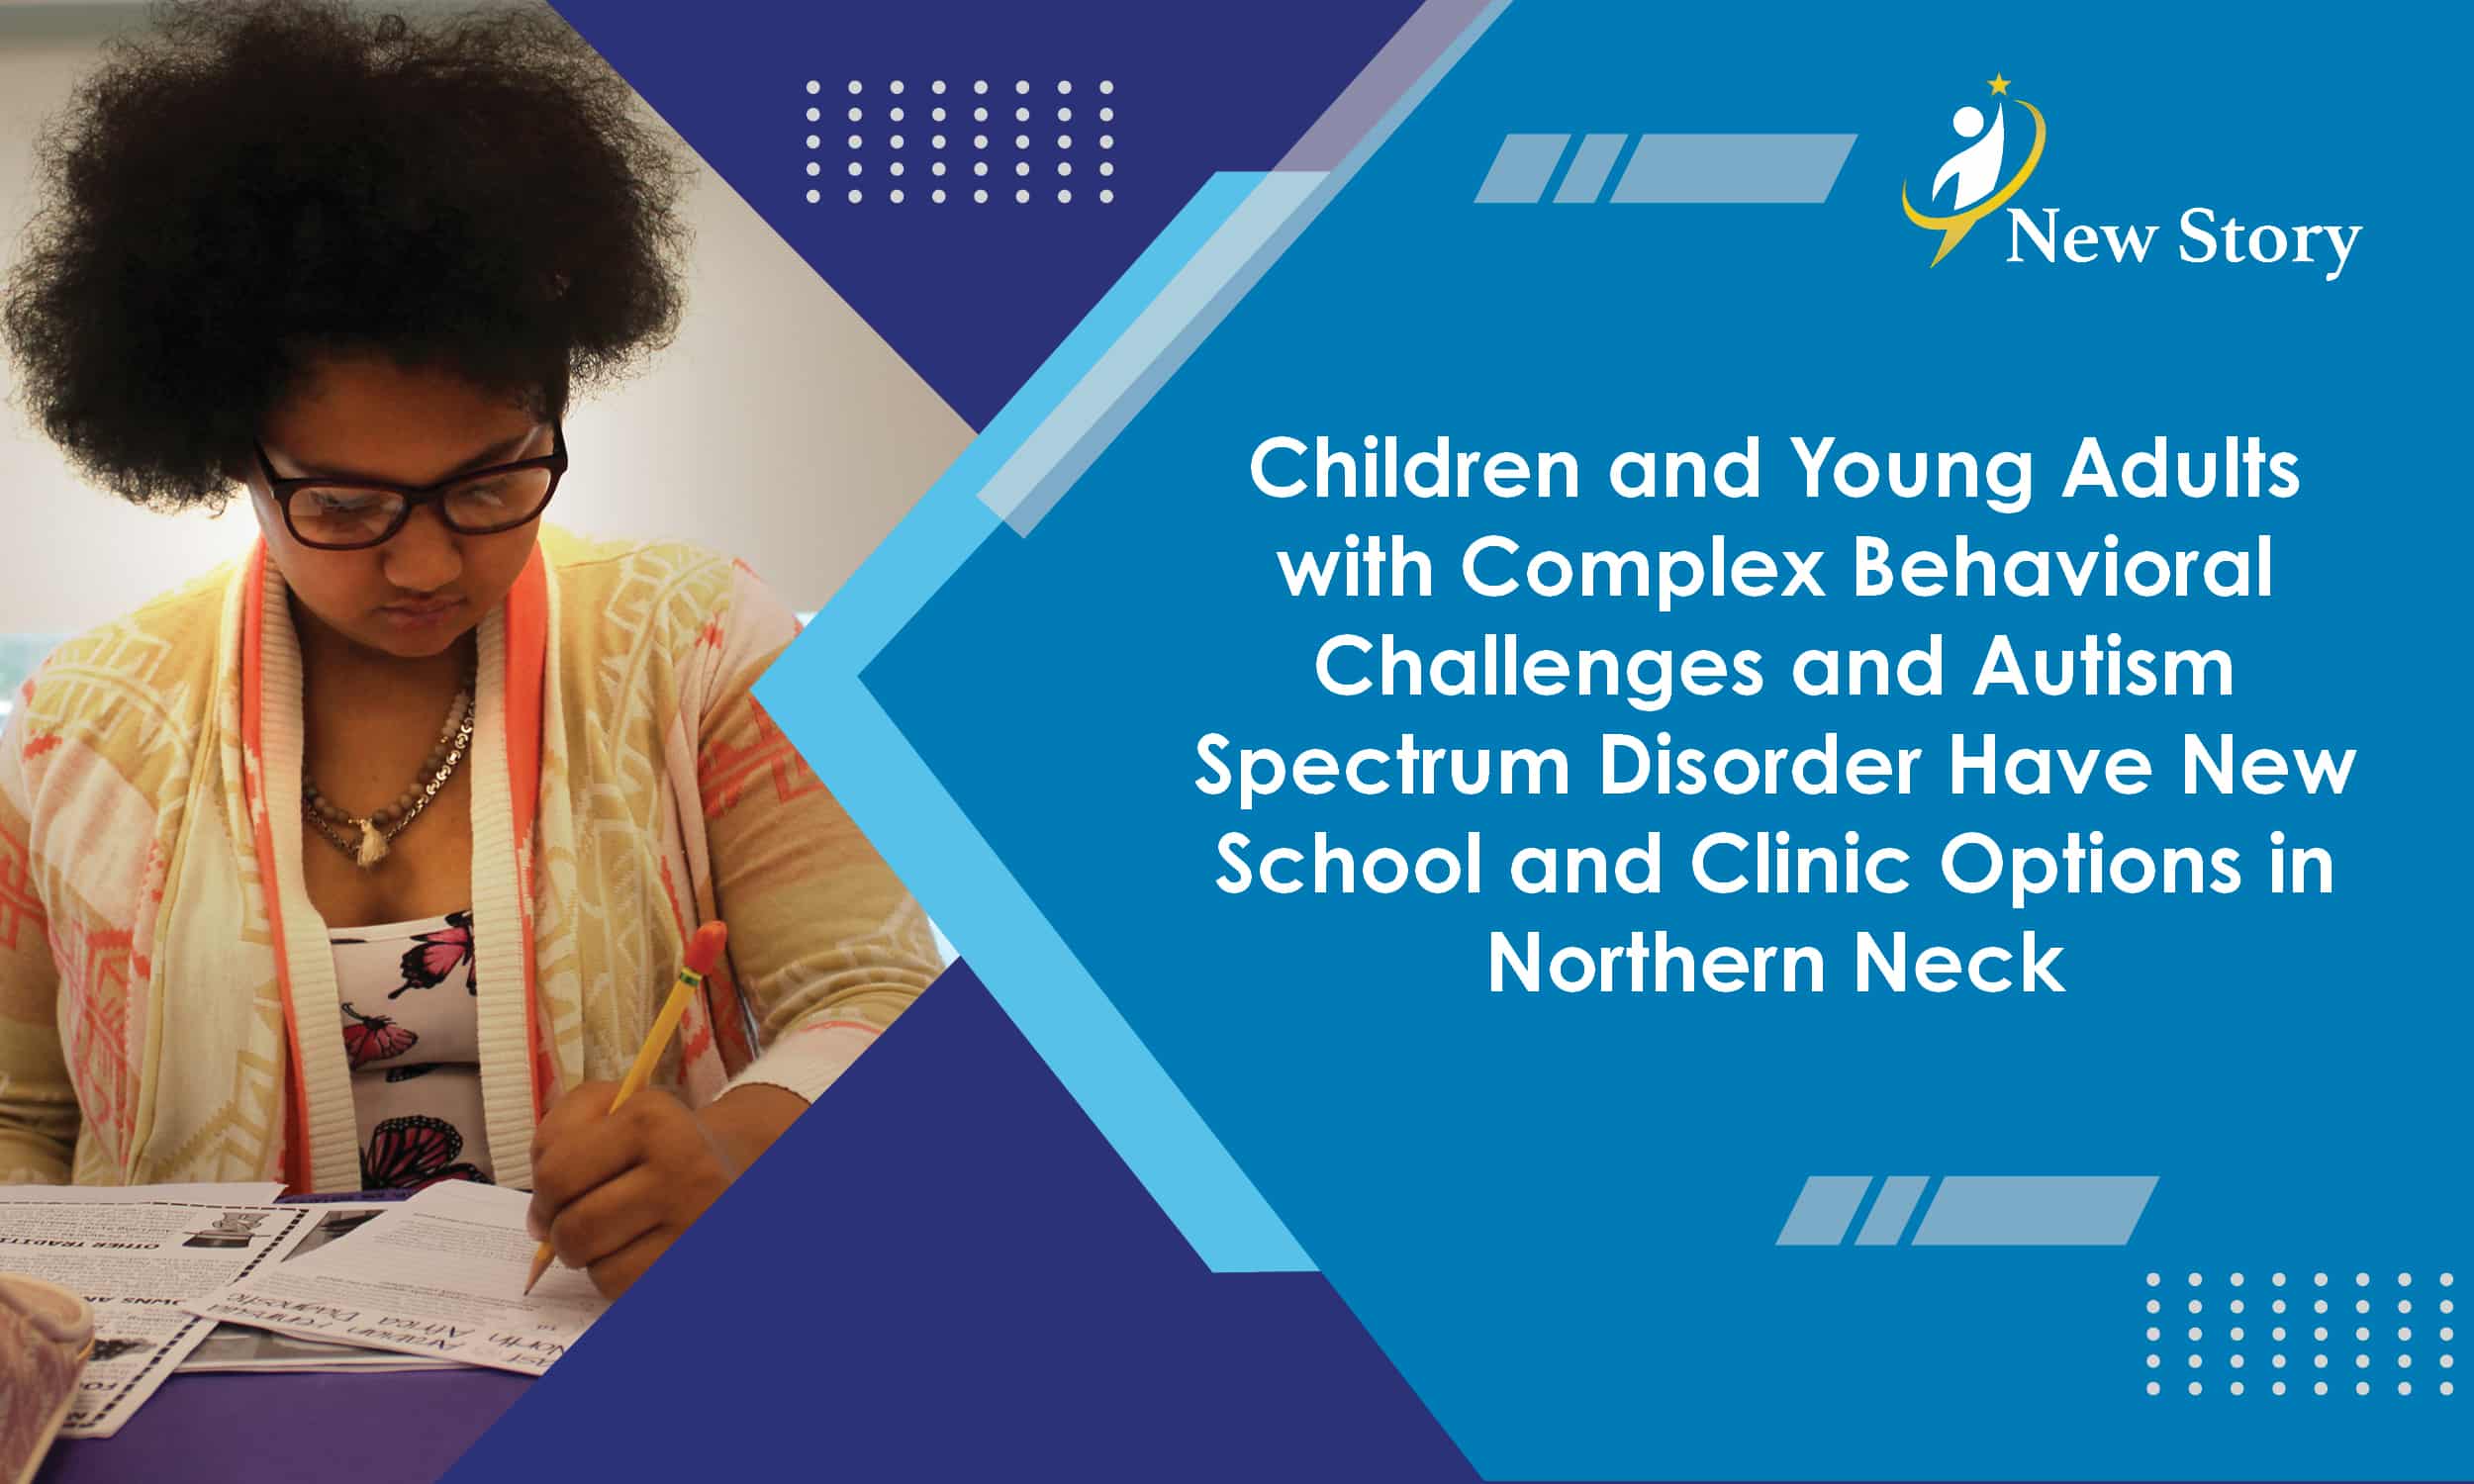 Children and Young Adults with Complex Behavioral Challenges and Autism Spectrum Disorder Have New School and Clinic Options in Northern Neck